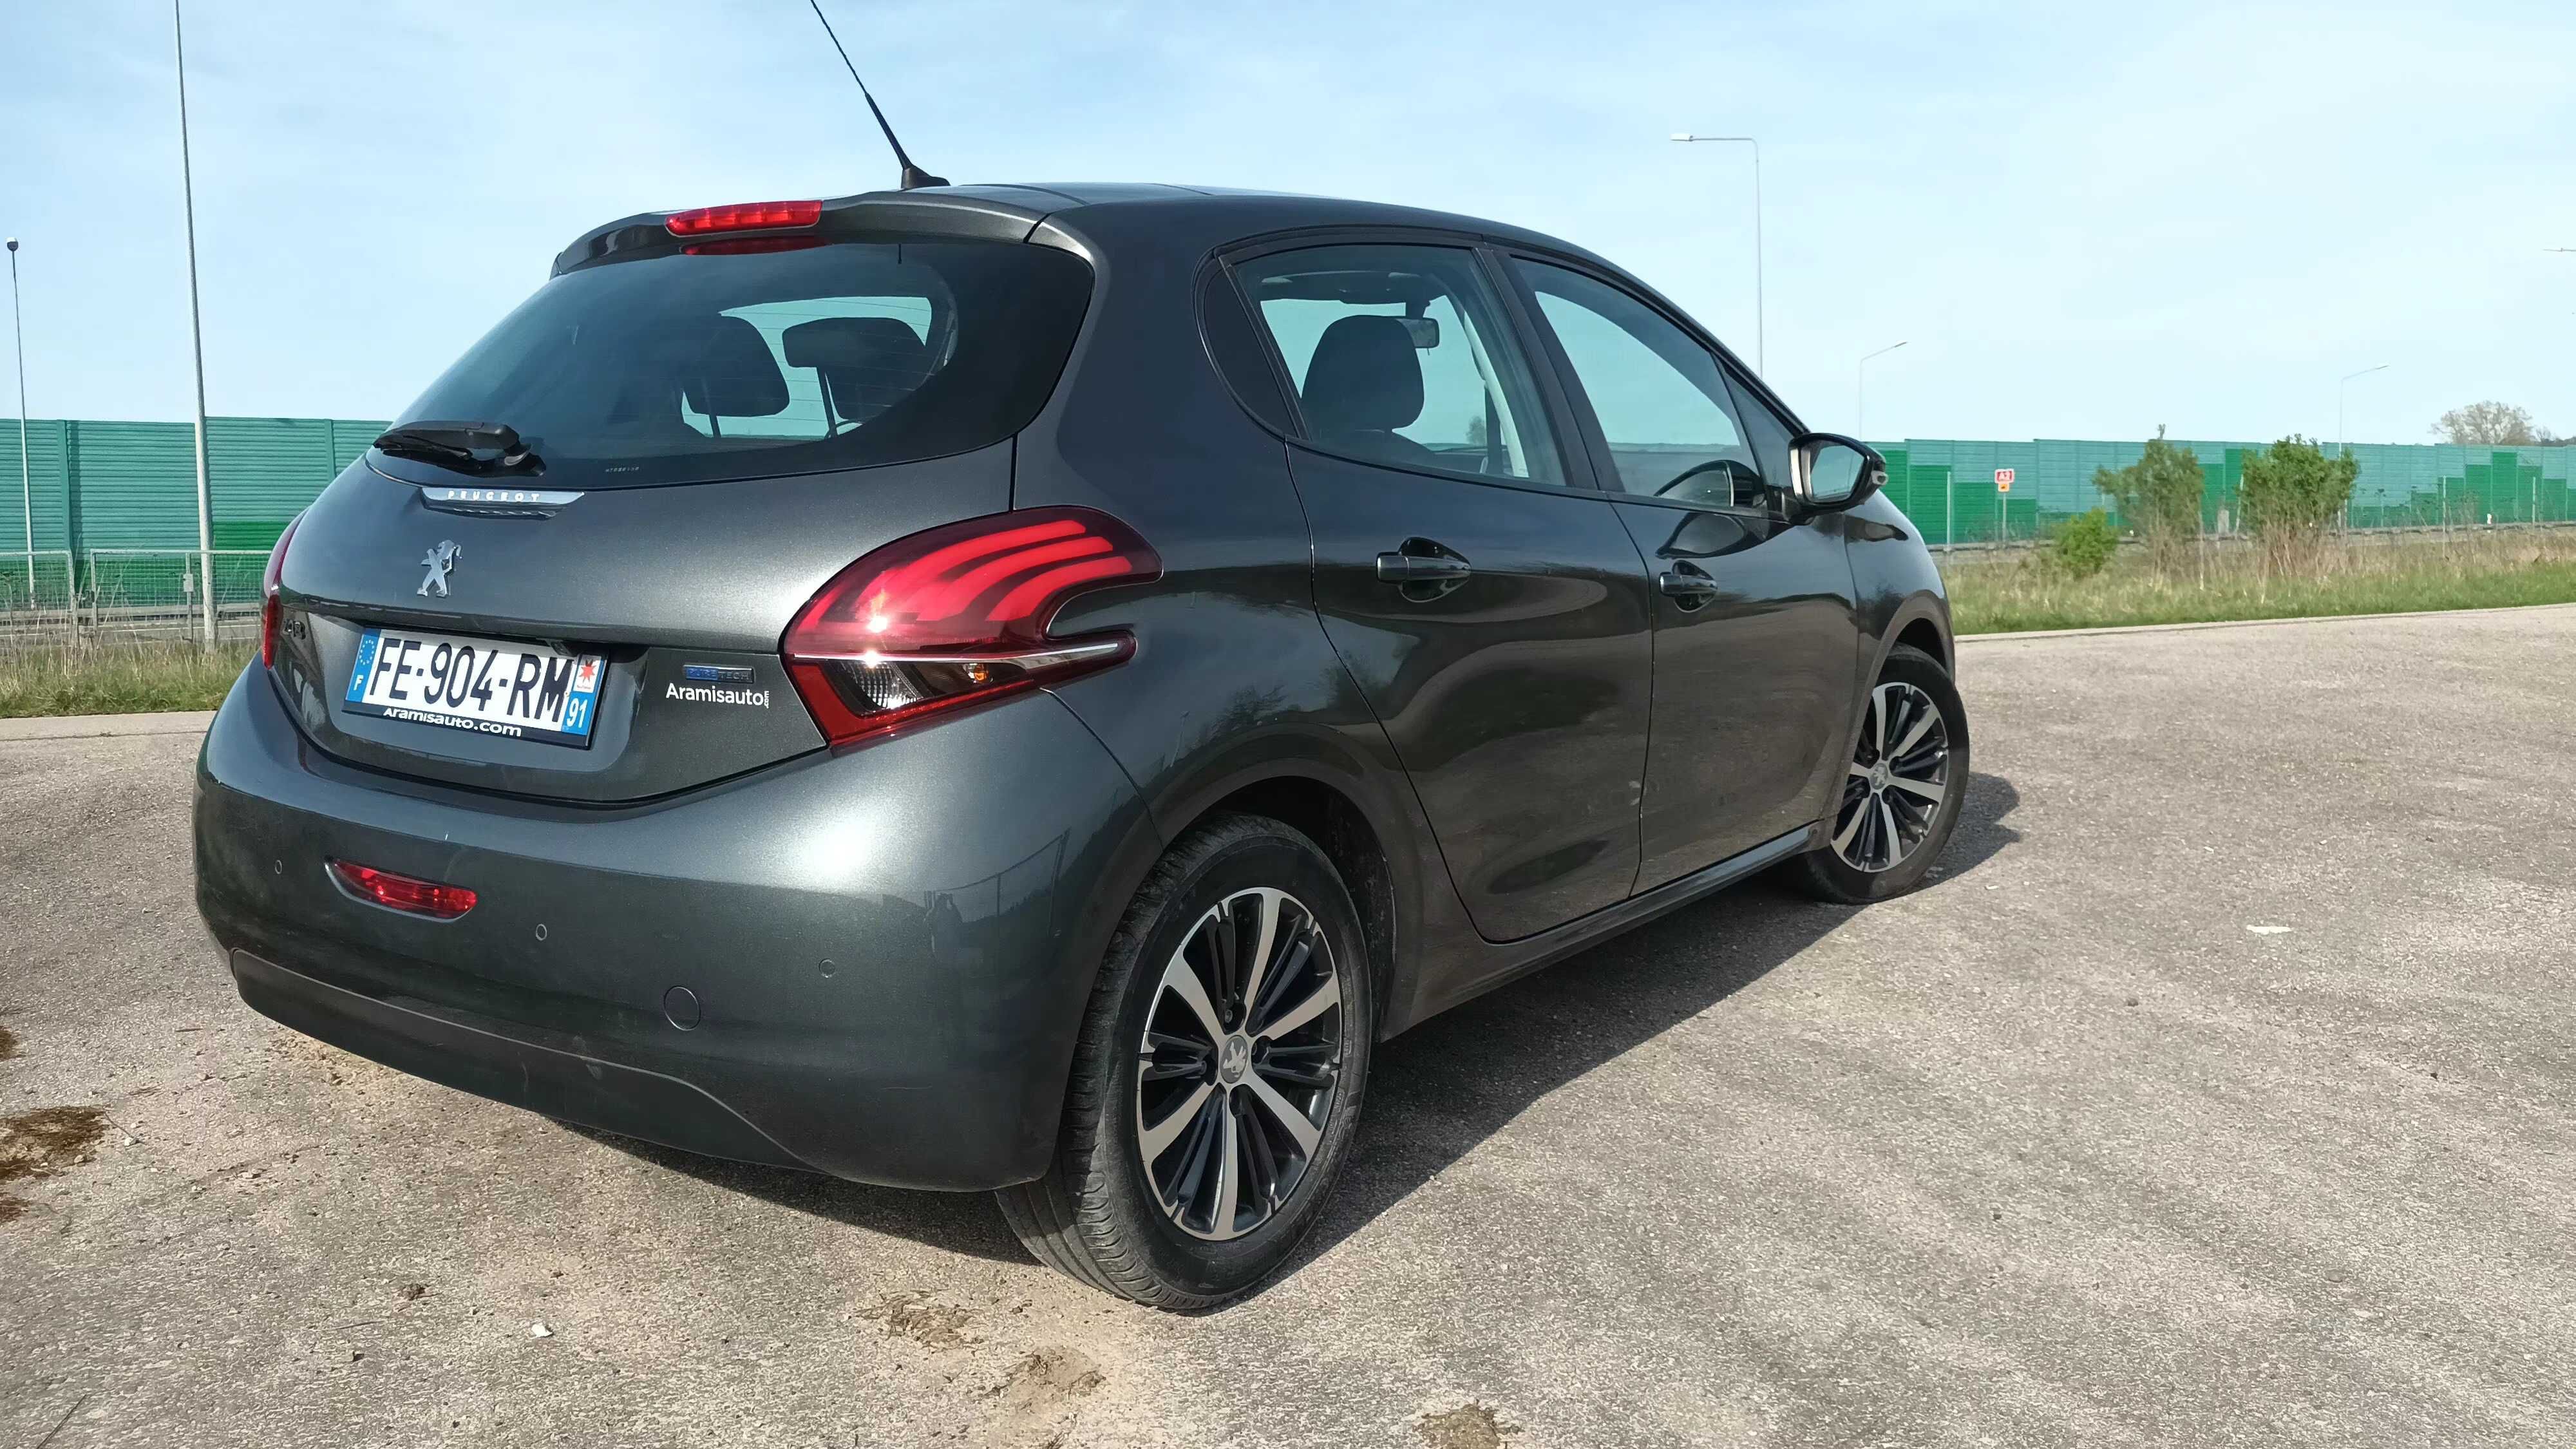 Peugeot 208 1.2 benzyna